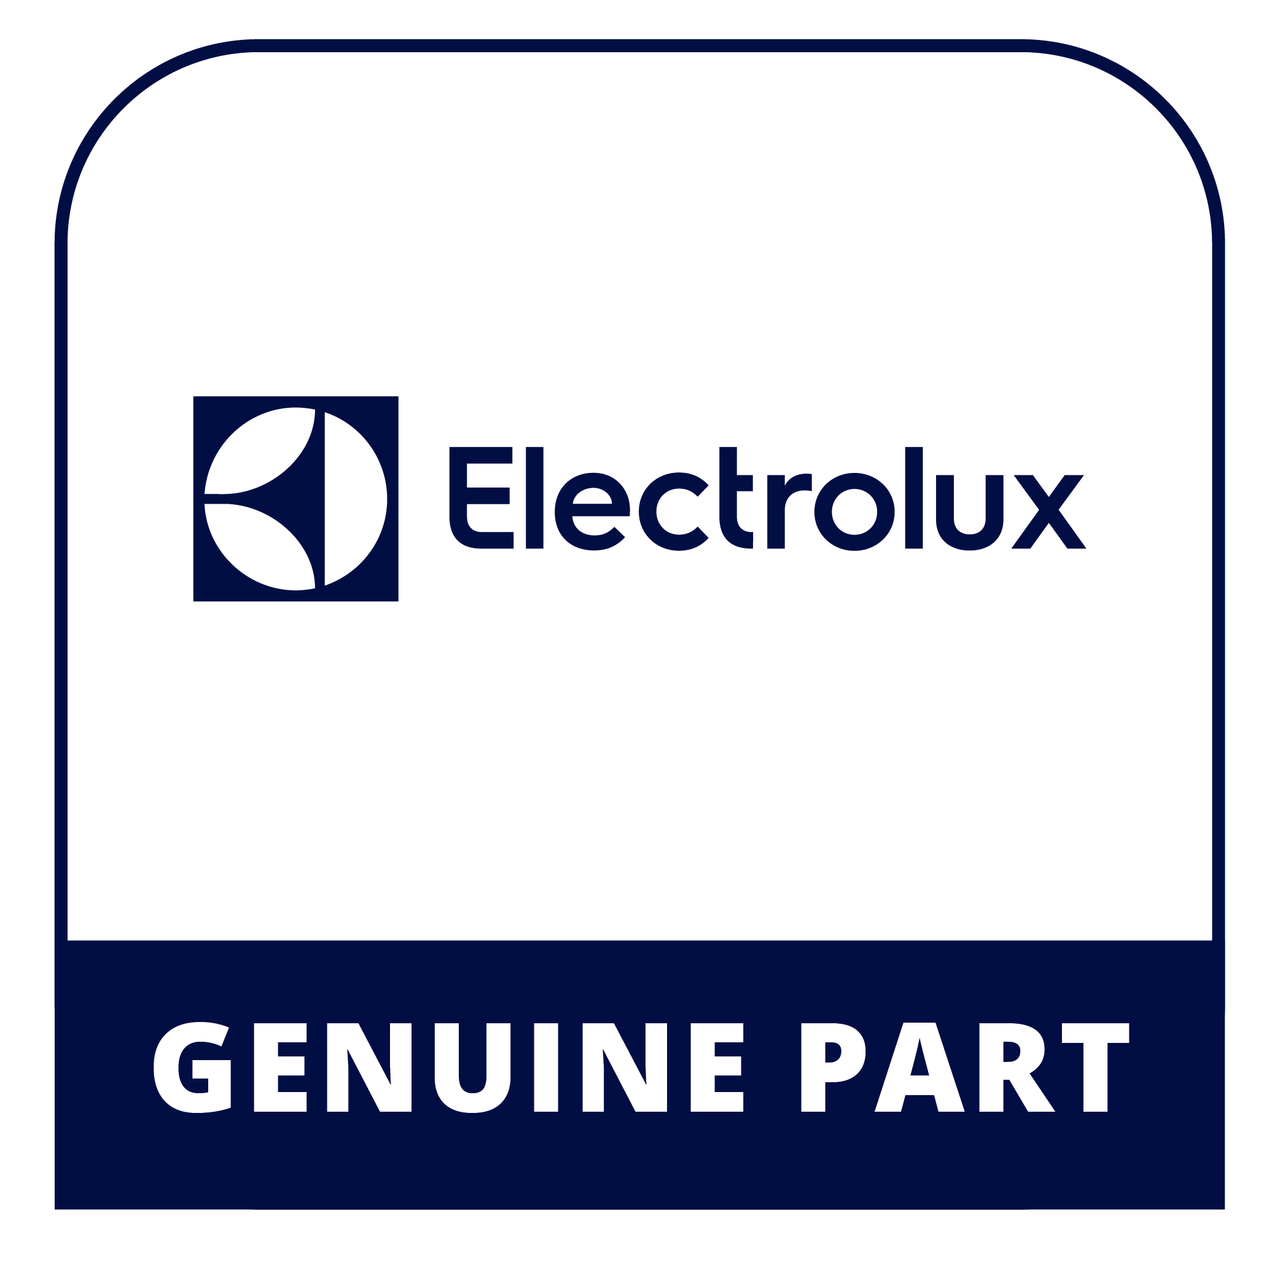 Frigidaire - Electrolux 5304490204 Use & Care Guide - Genuine Electrolux Part